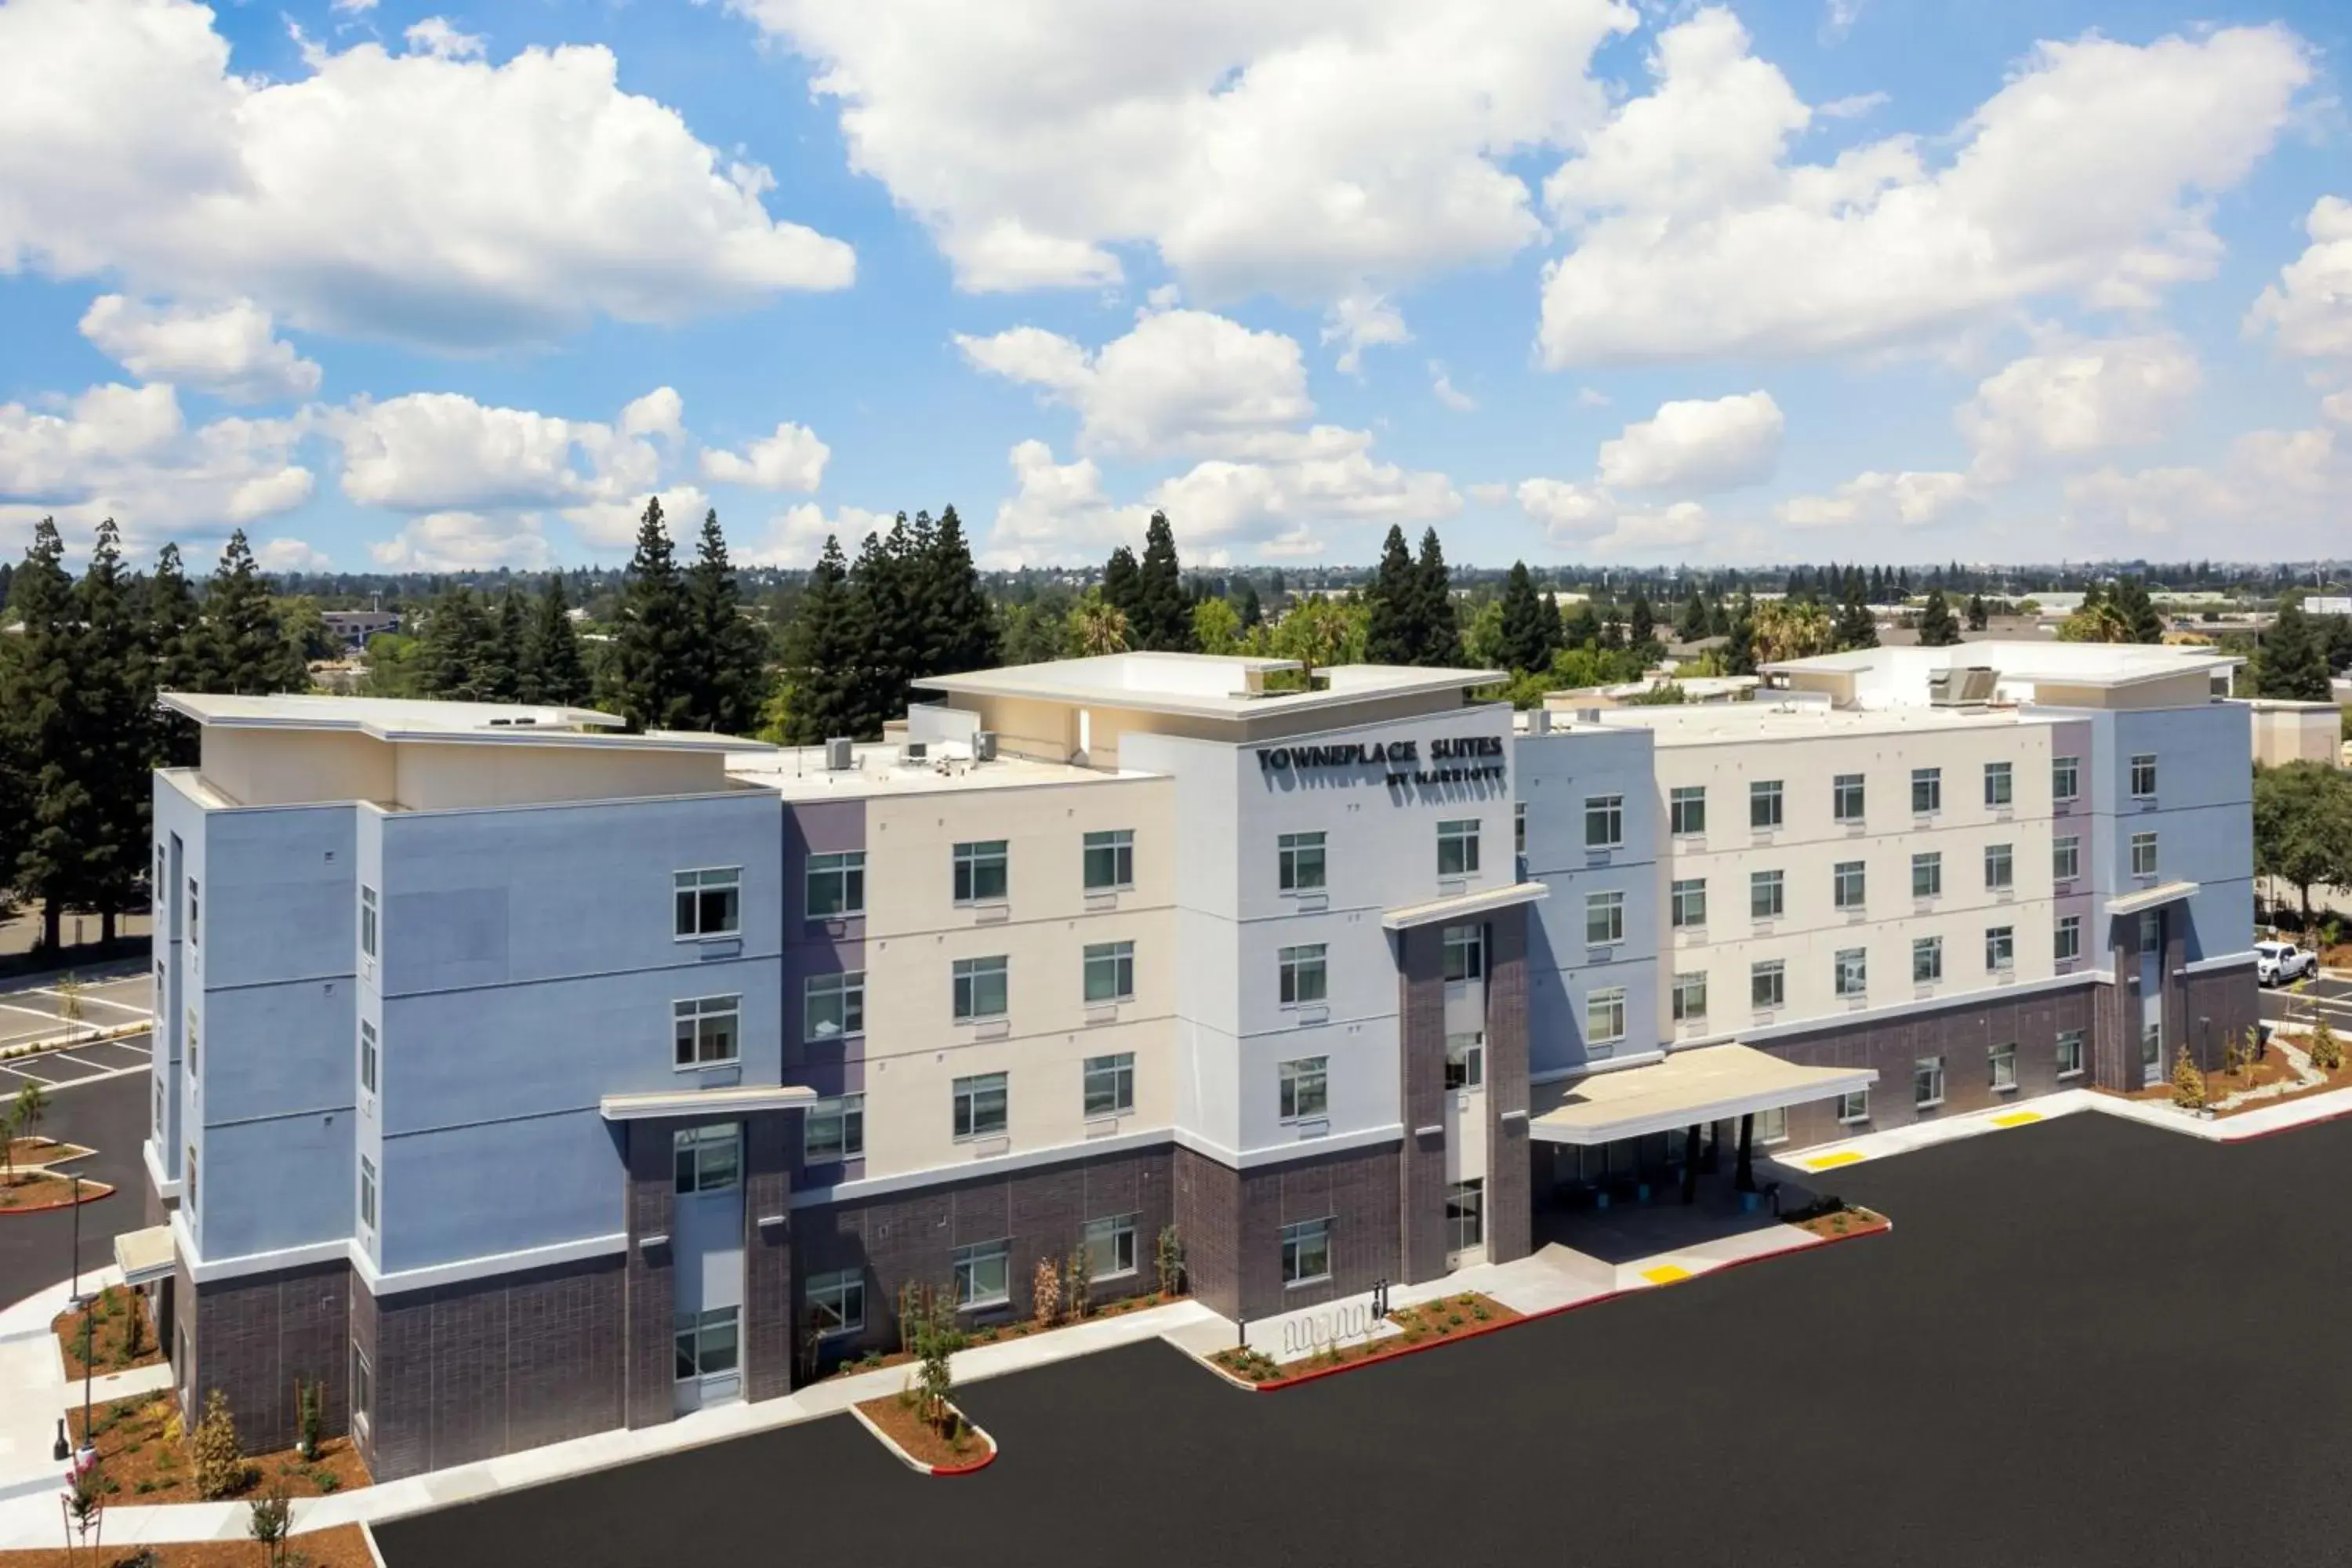 Property building in TownePlace Suites by Marriott Sacramento Rancho Cordova